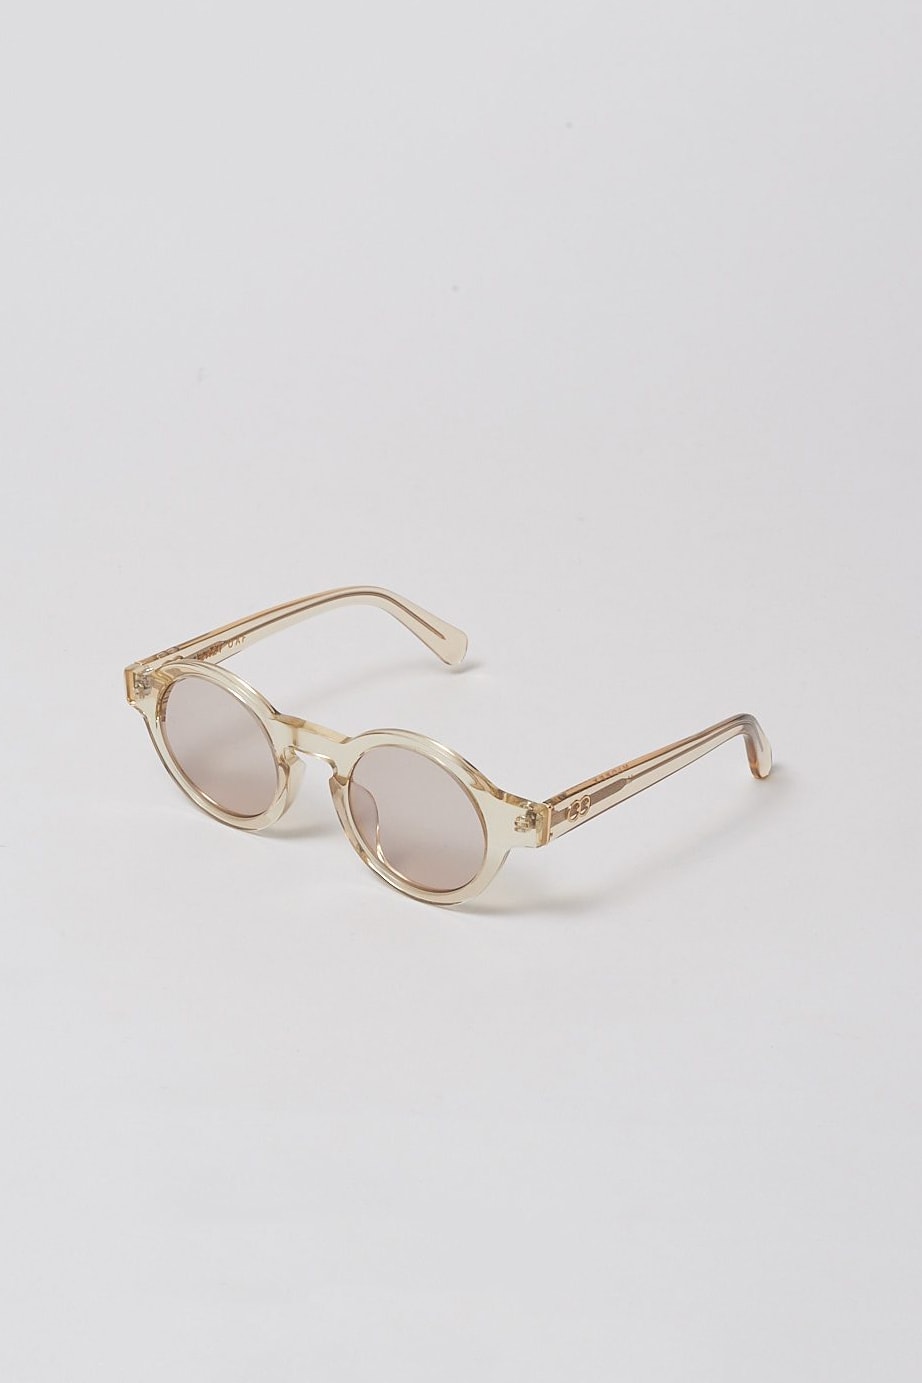 lazy oaf debut sunglasses collection london round clear off white tan